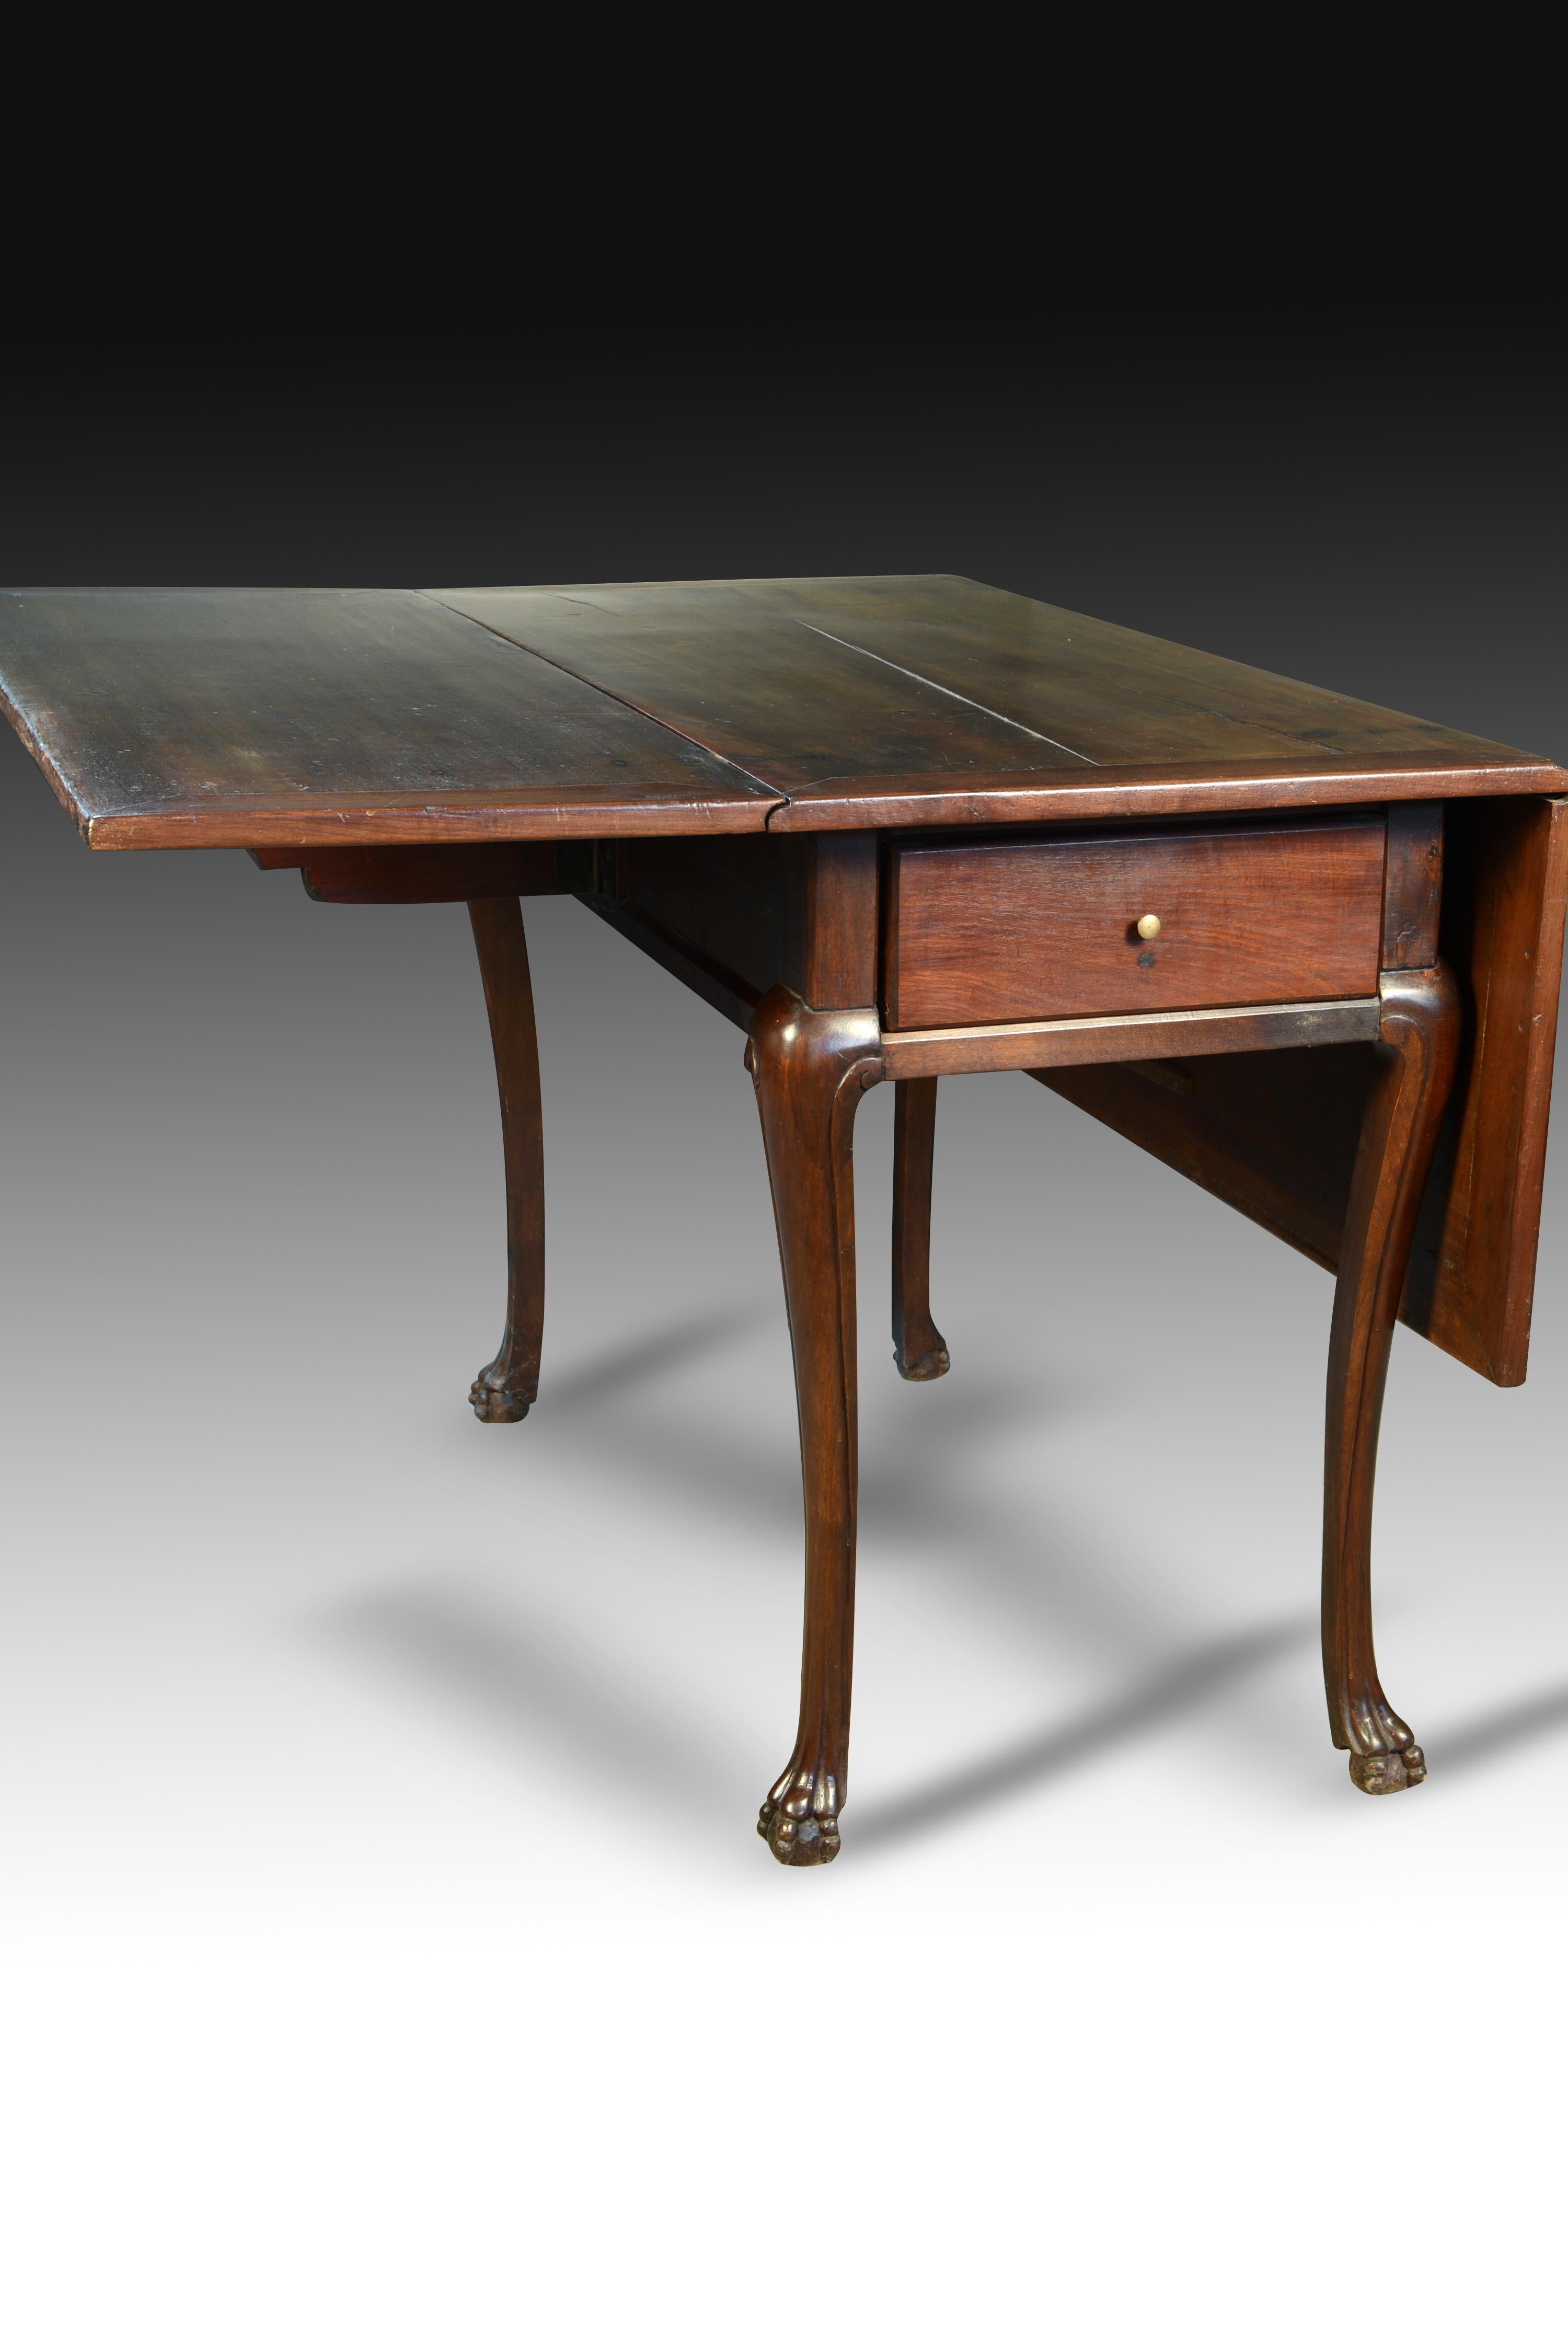 Neoclassical Walnut Gate Leg Table with 